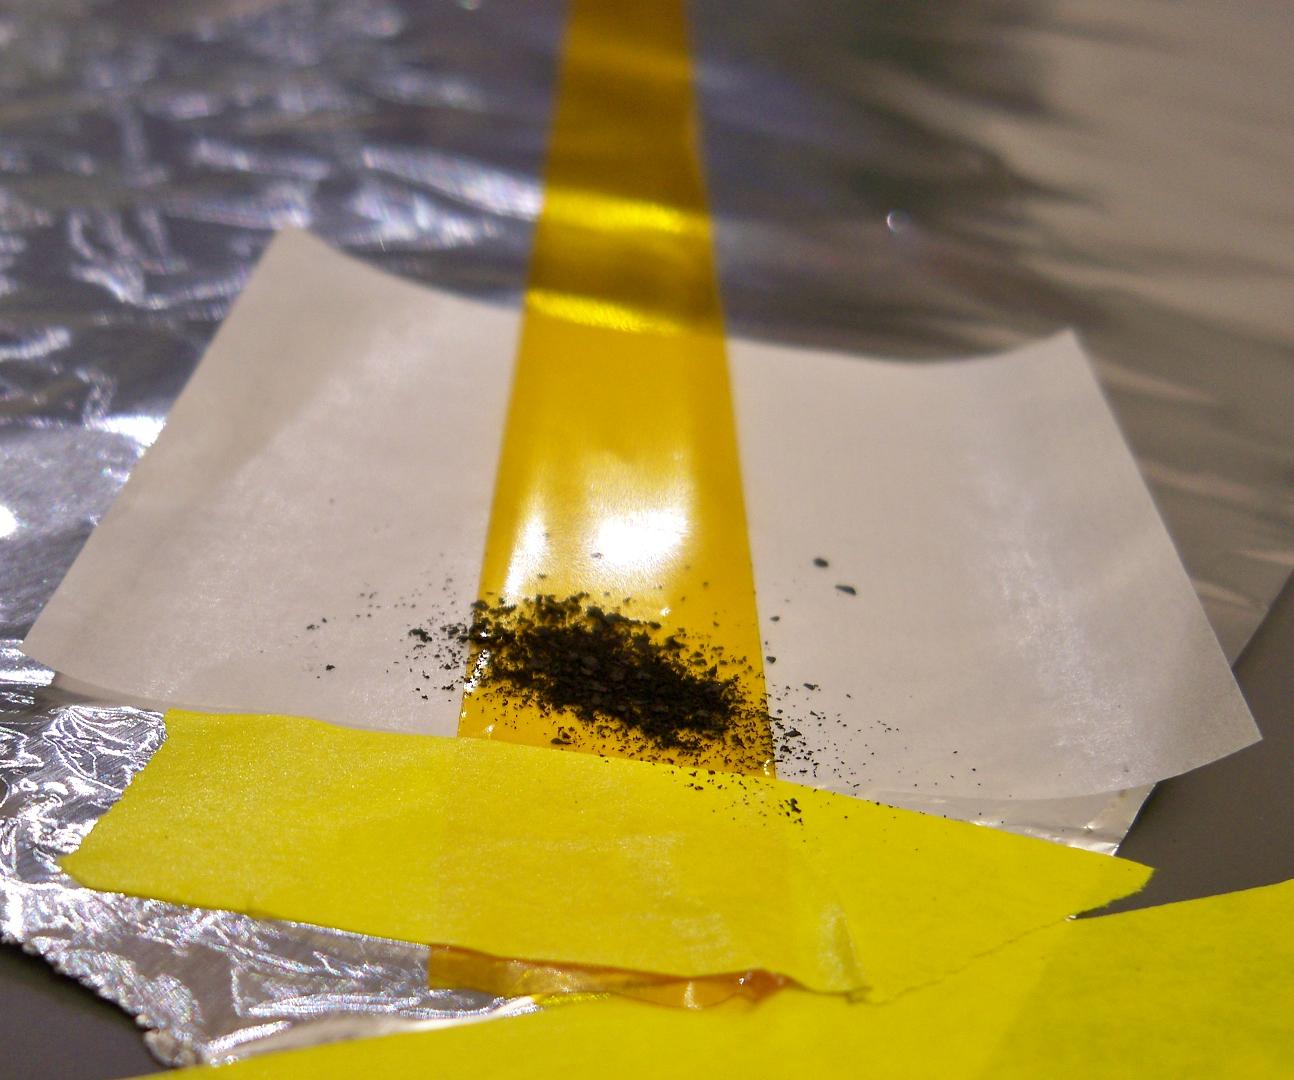 Add the sample onto an extreme of the Kapton tape